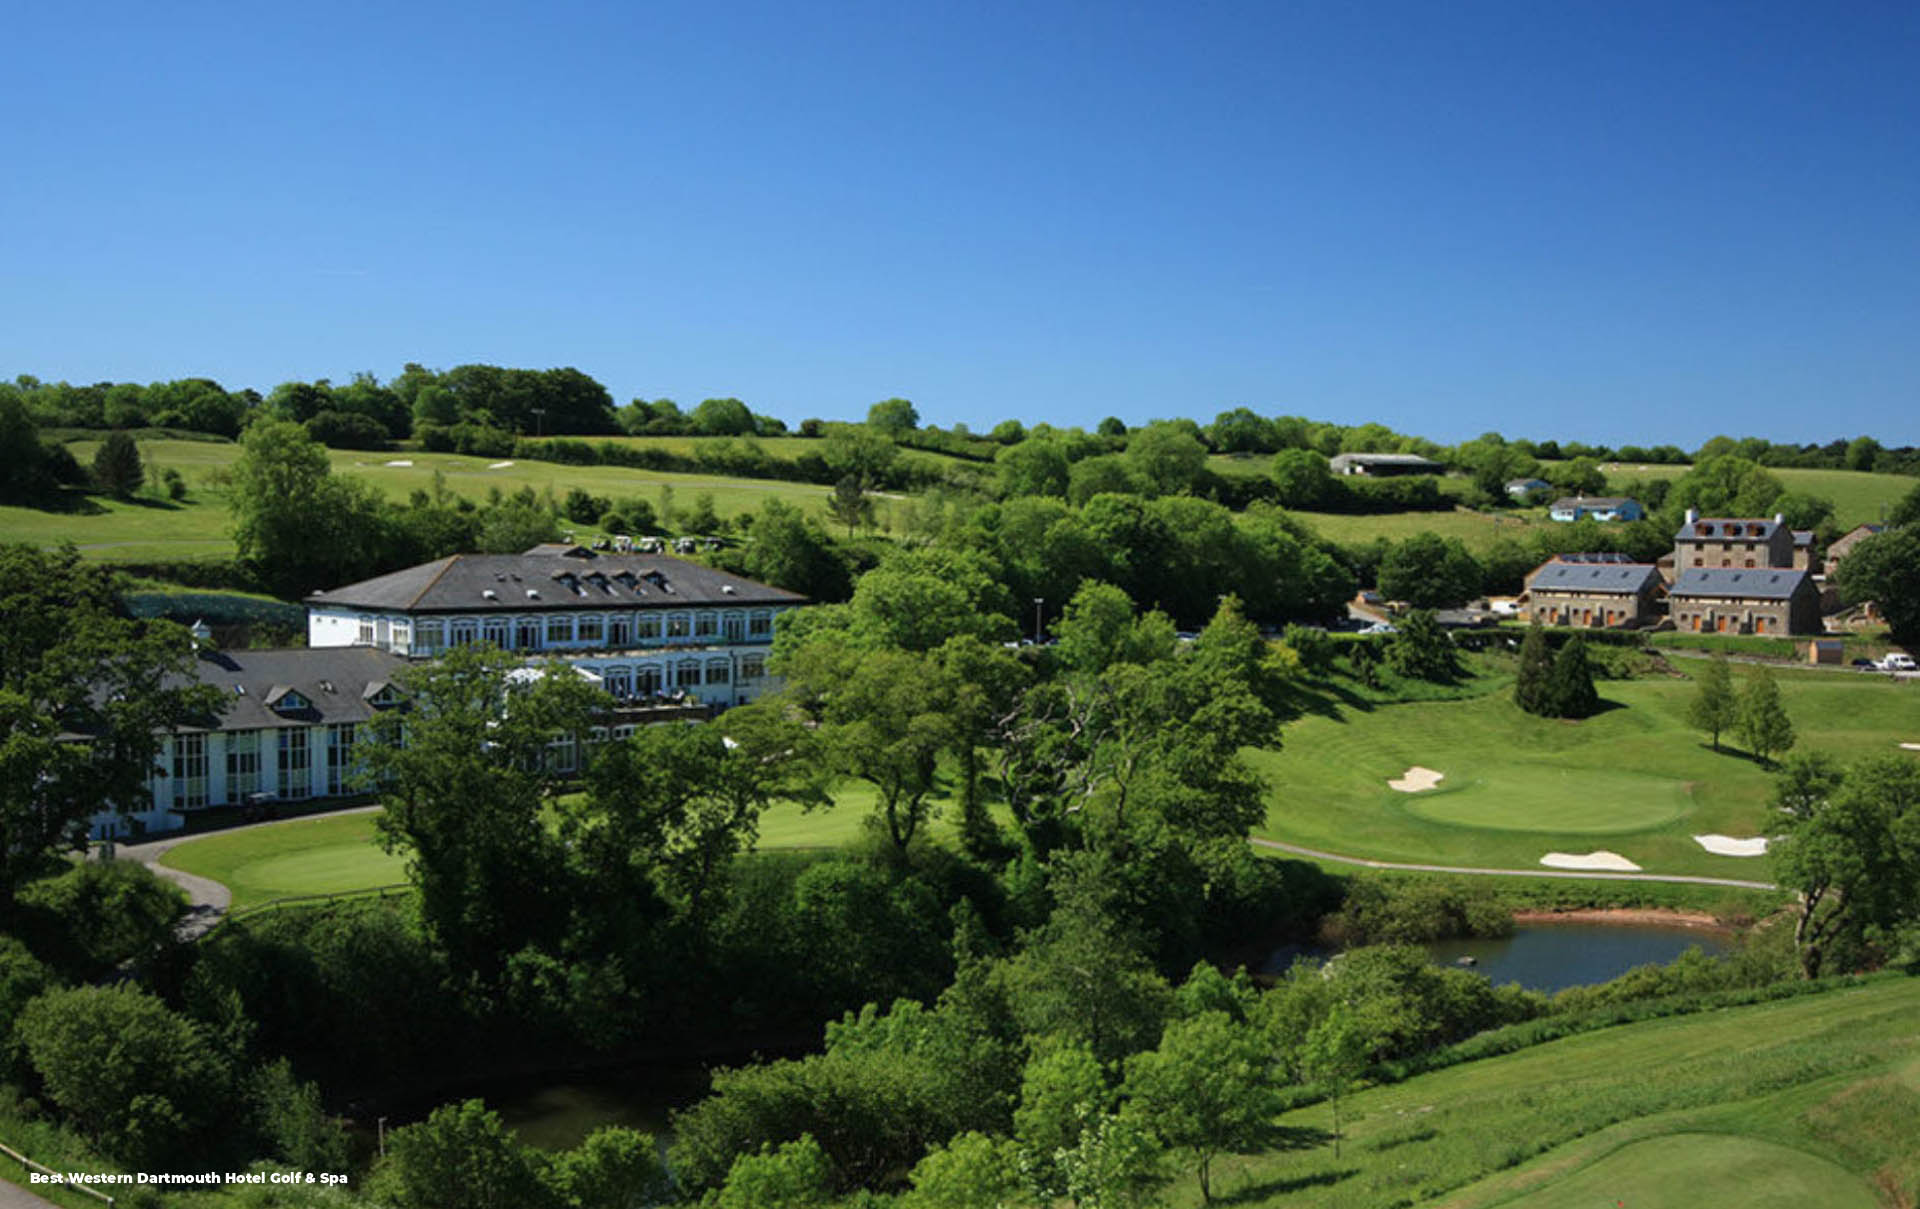 vine hotels experts in hotel management and development The Dartmouth Hotel Golf & Spa copy